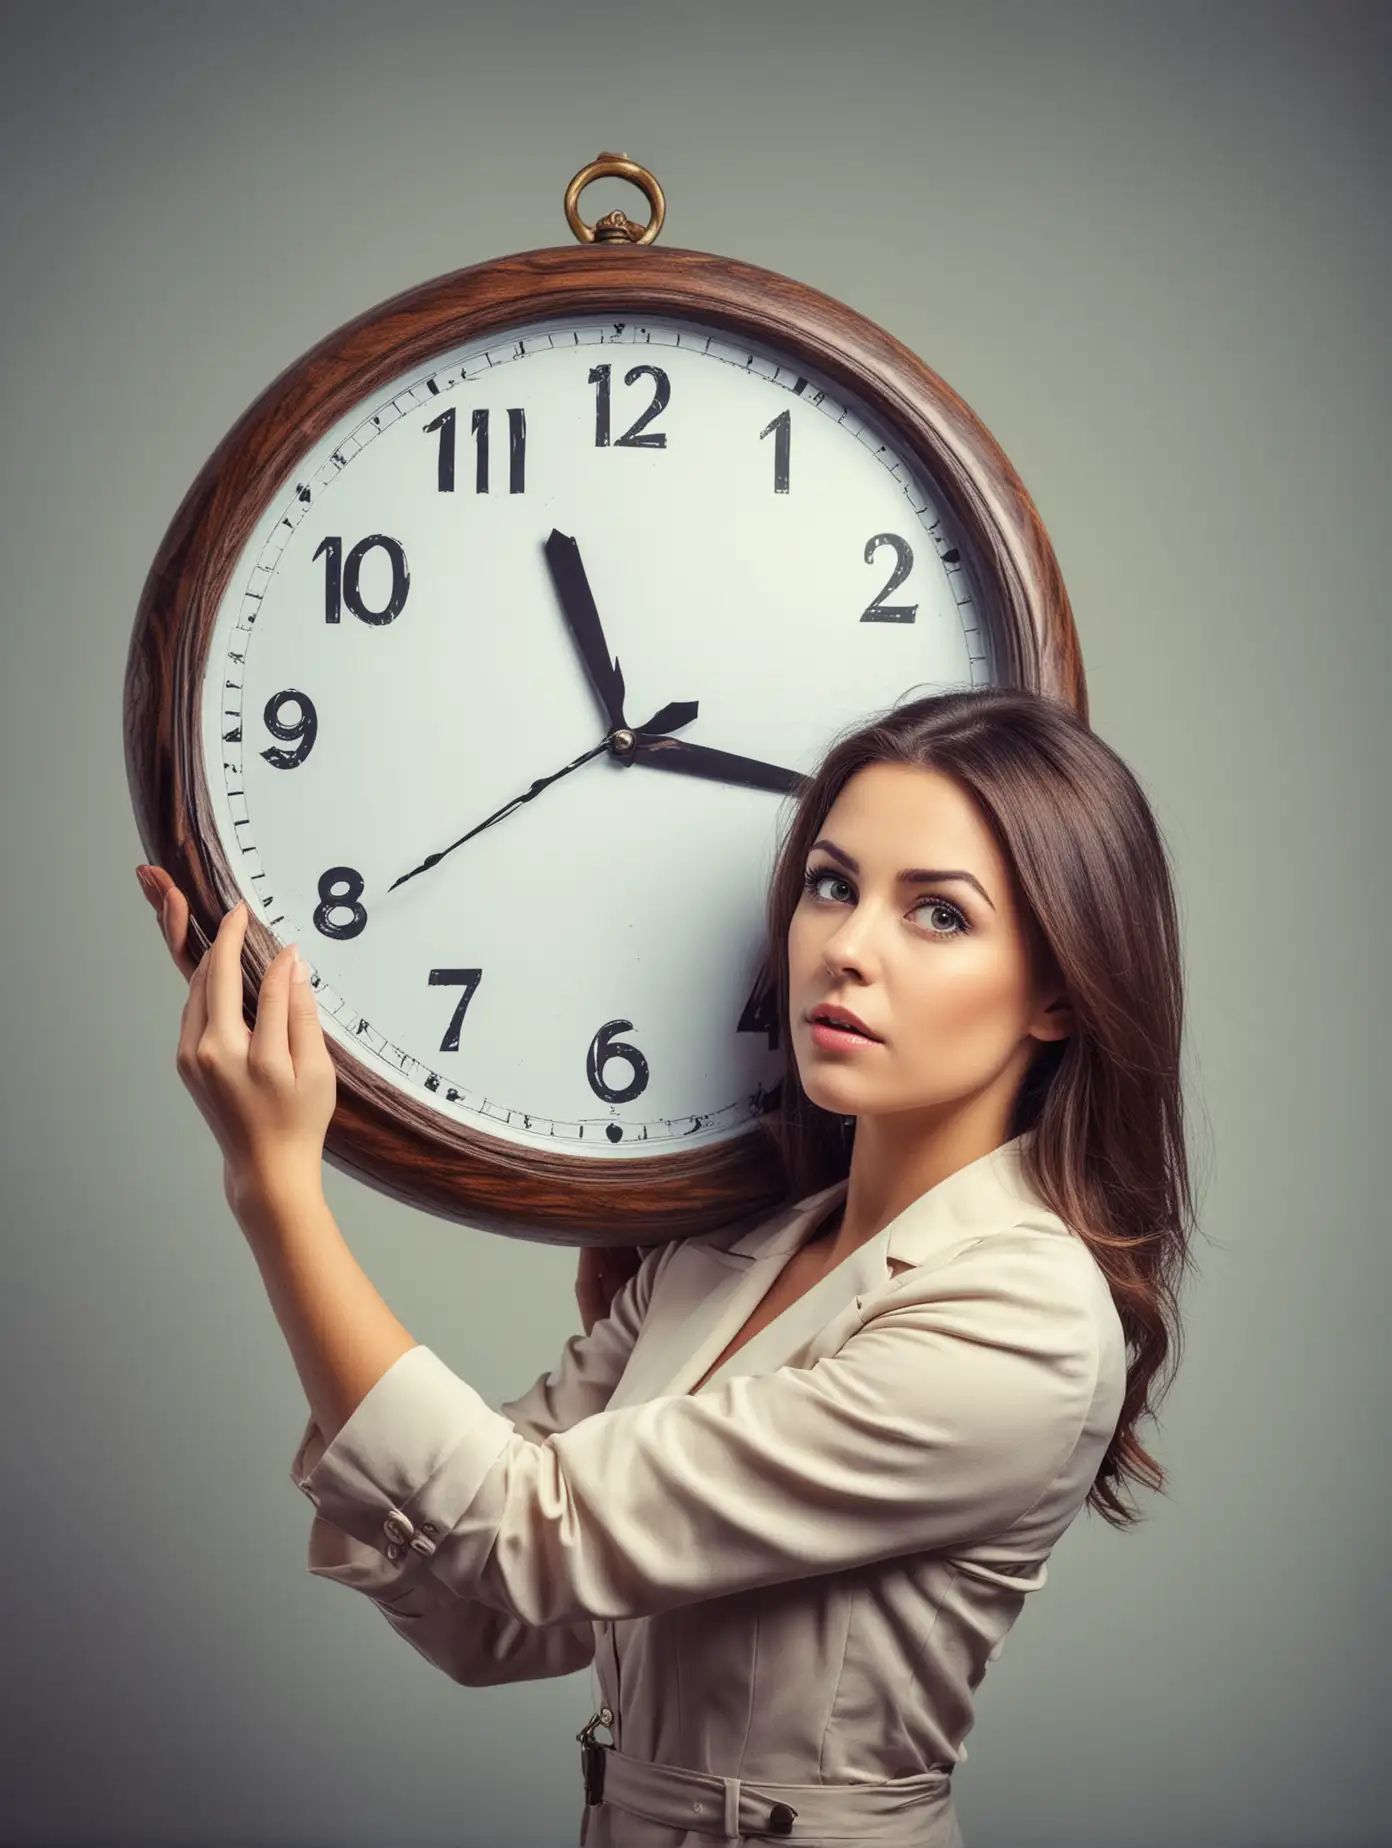 Professional Woman Holding Large Clock in Business Attire